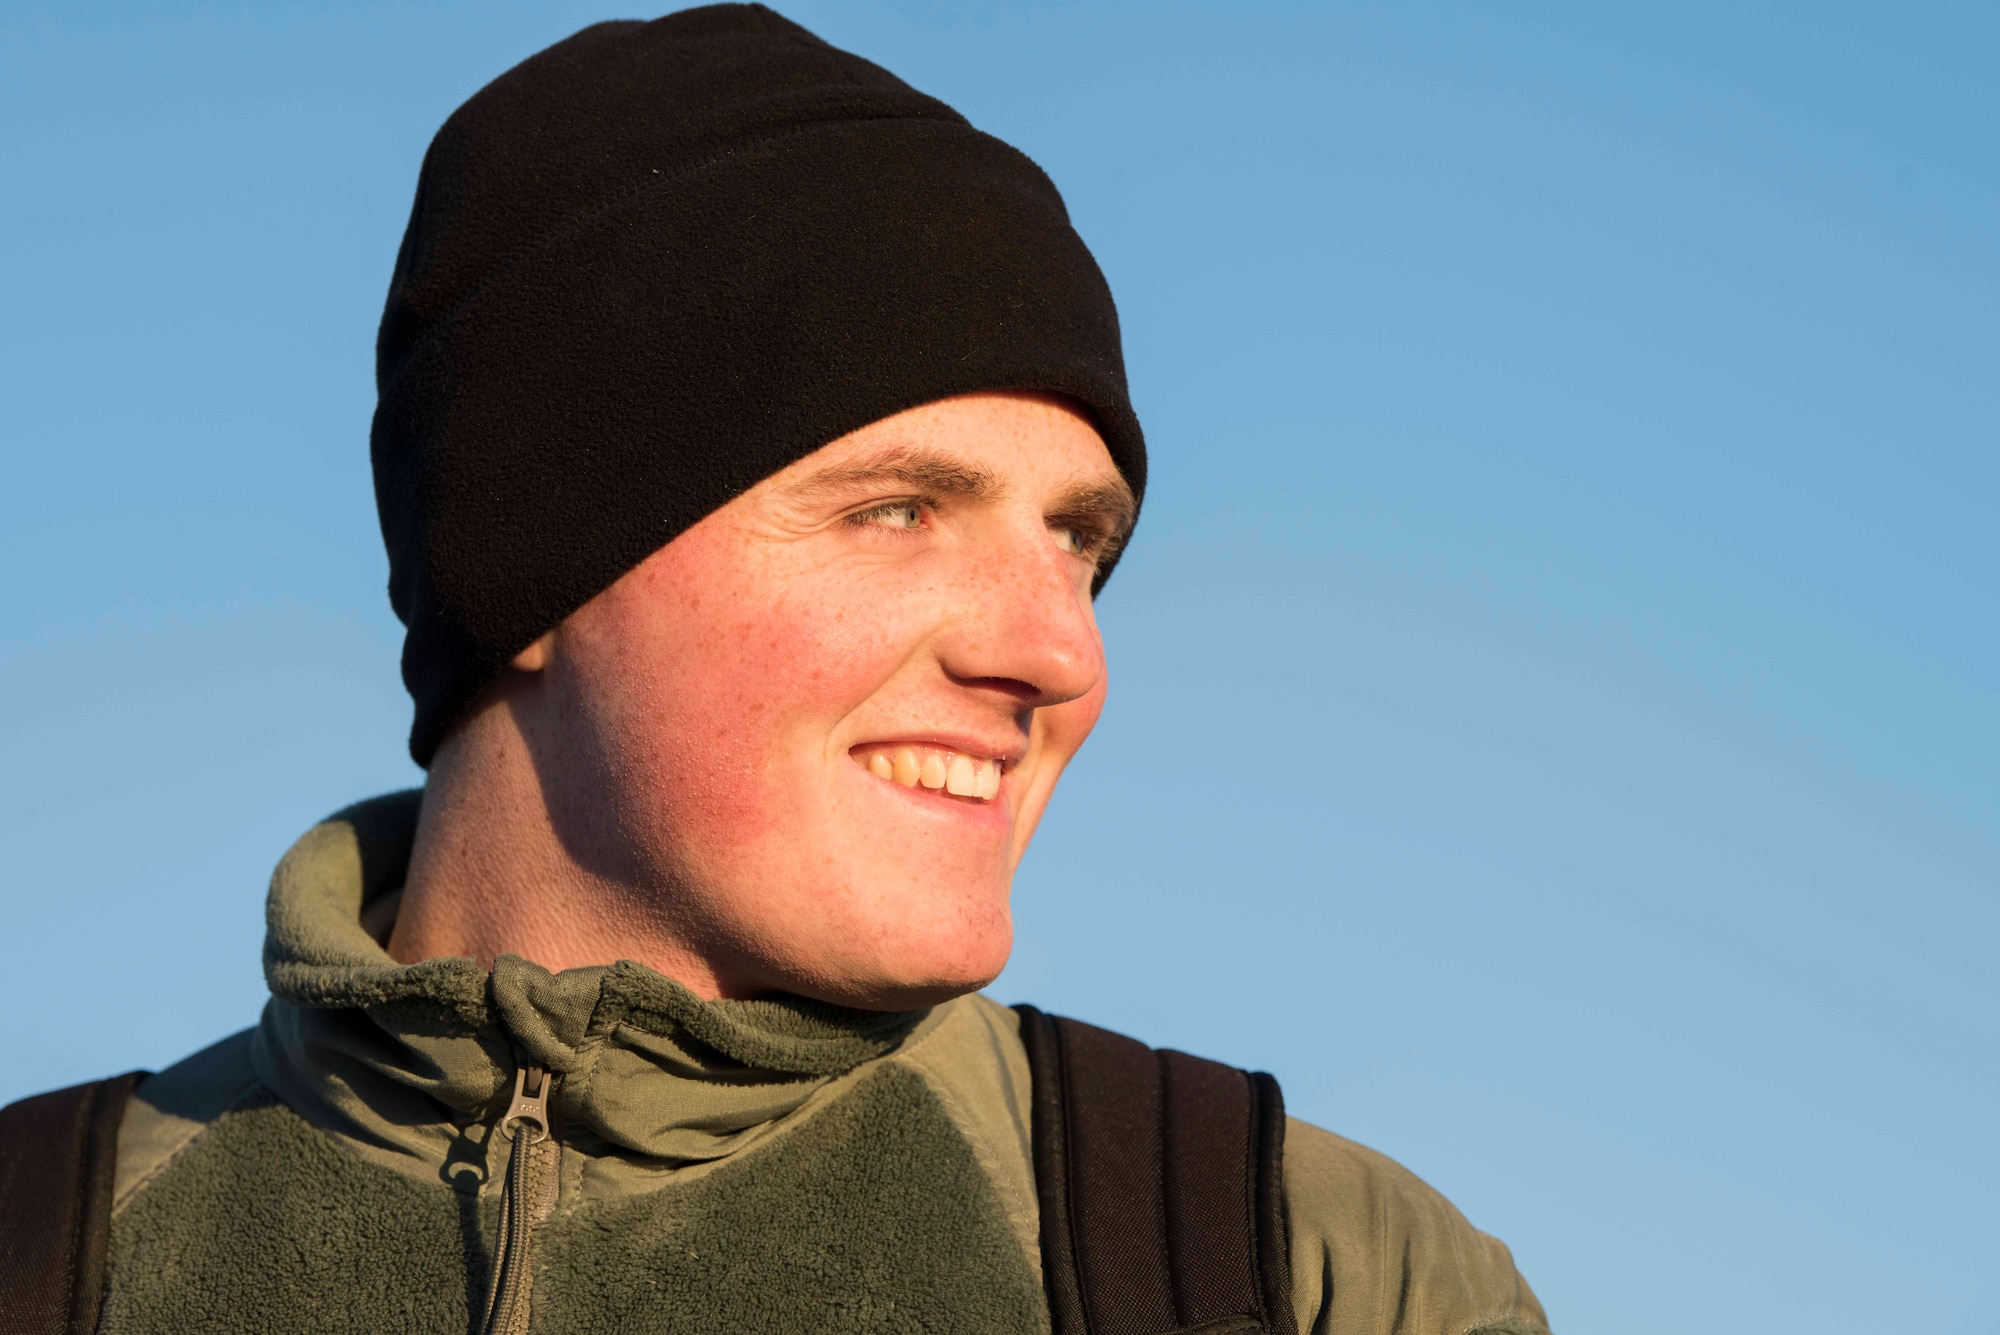 U.S Air Force Airman 1st Class Nathan Bauer, a 35th Aircraft Maintenance Squadron crew chief, smiles during exercise RED FLAG Alaska 19-1 at Eielson Air Force Base, Alaska, Oct. 6, 2018. Team Misawa members wear fleeces and gloves when working on the flight line to protect themselves from the cold weather. (U.S. Air Force photo by Airman 1st Class Collette Brooks)